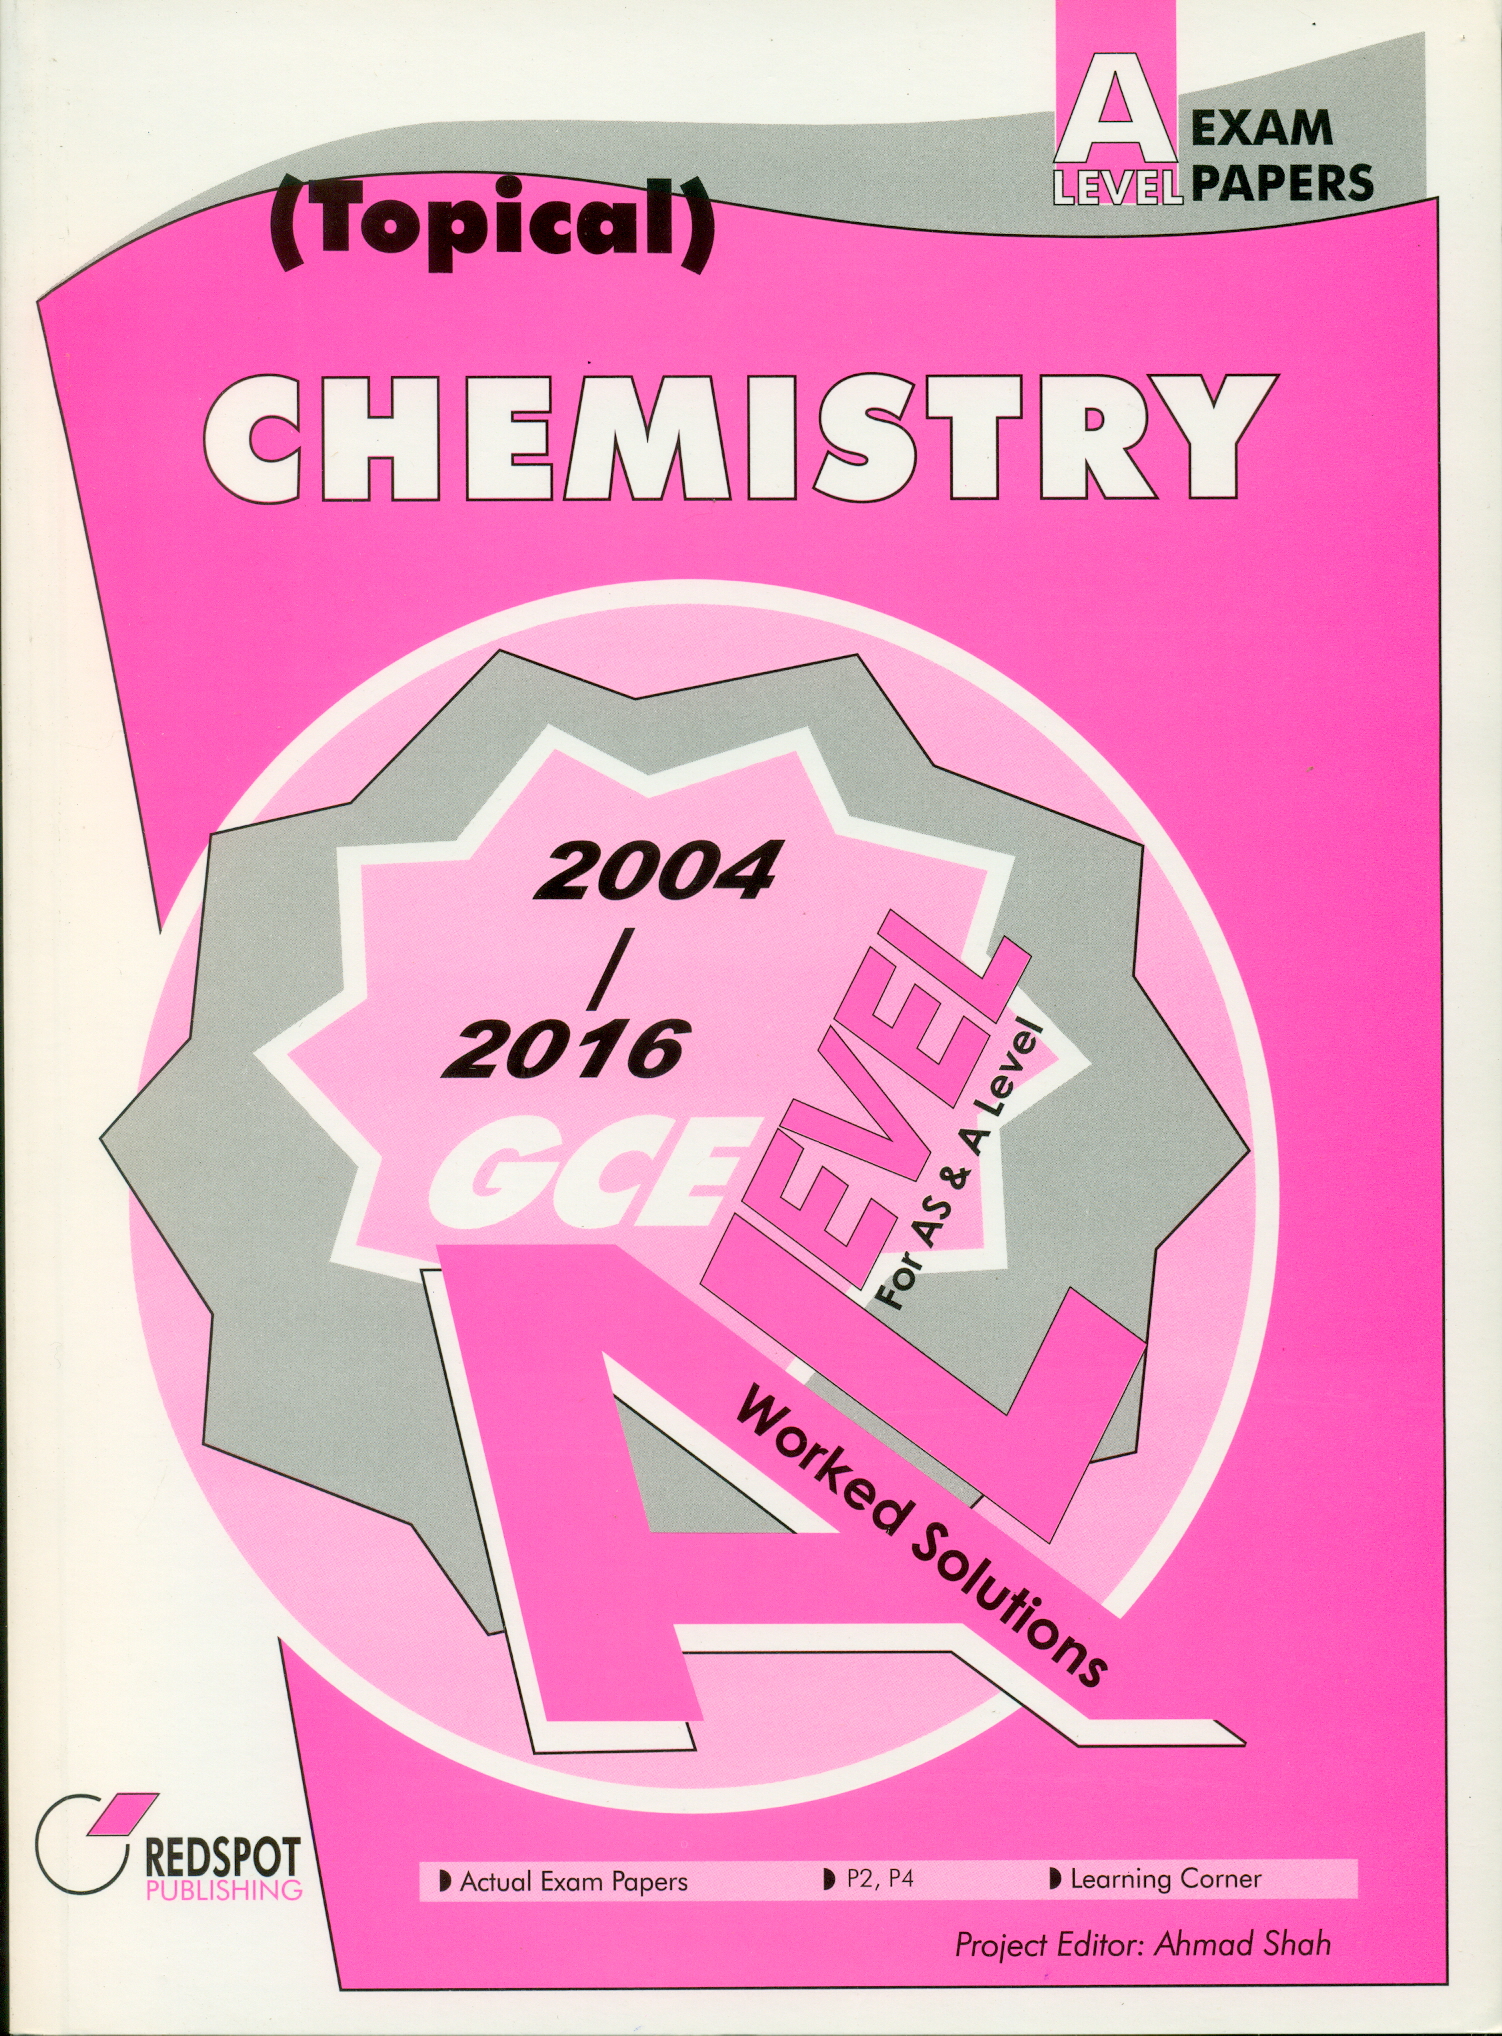 REDSPOT A Level Exam Papers Topical Chemistry - Year 2004 -2016